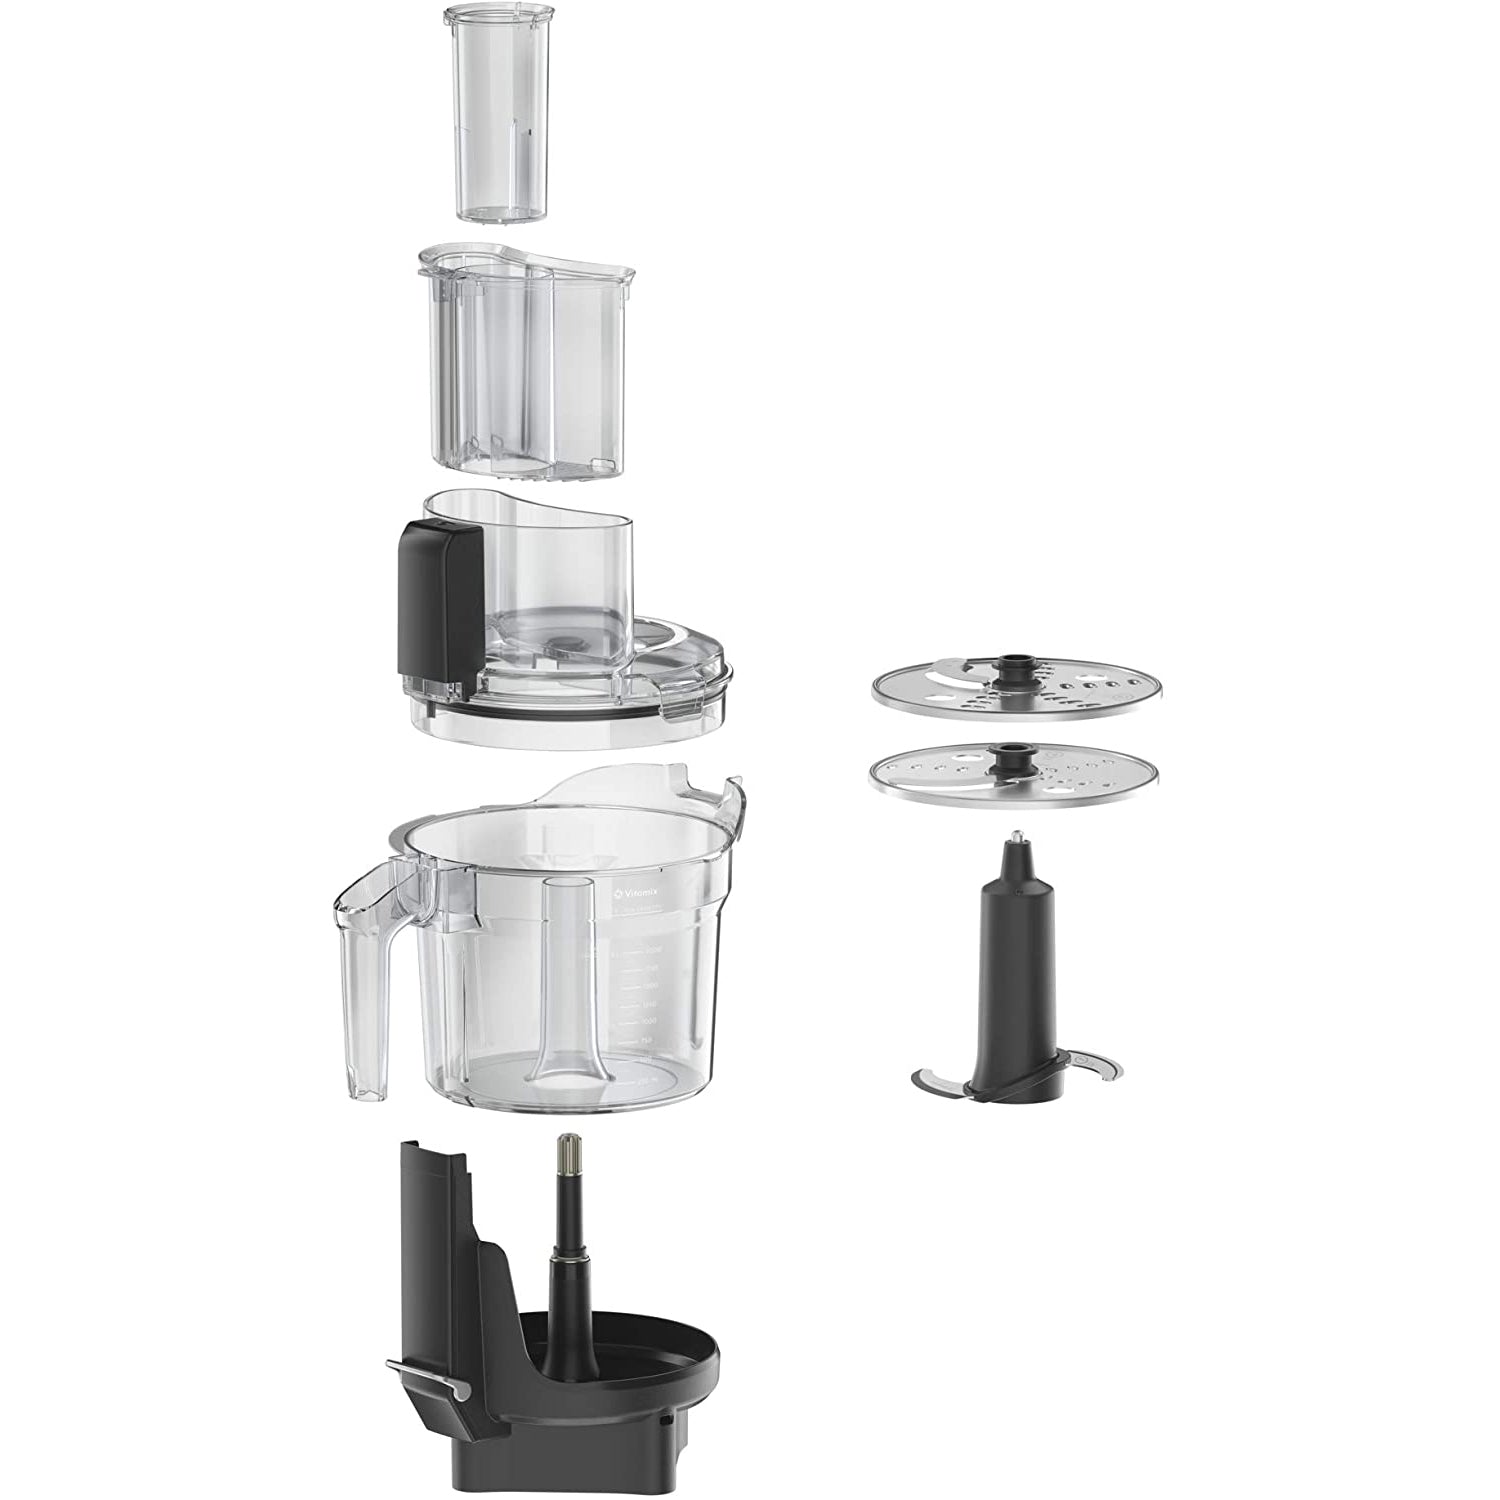 how to use moulinex food processor attachments